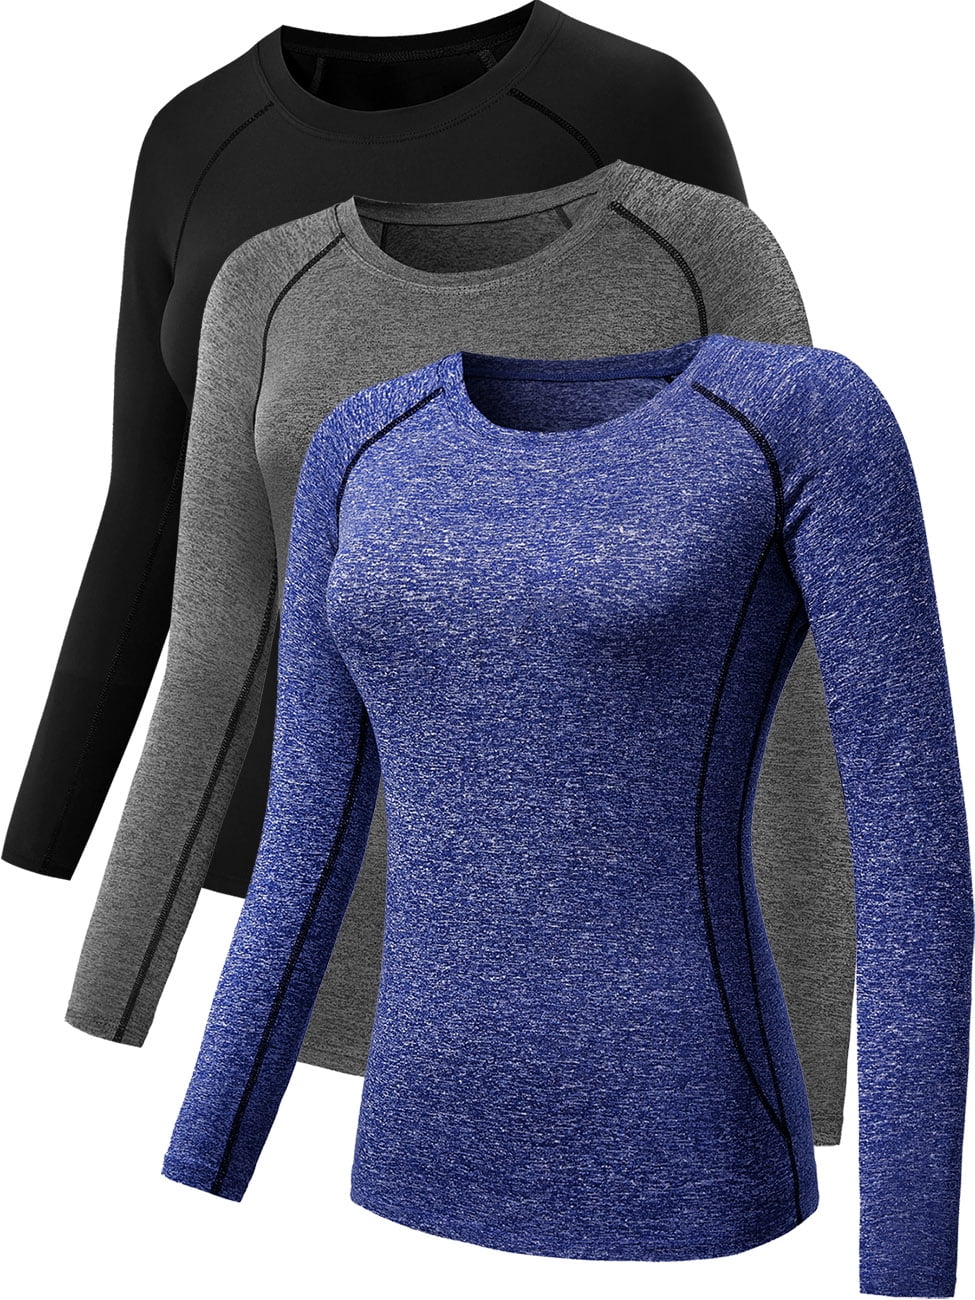 NELEUS Womens Athletic Compression Long Sleeve Yoga T Shirt Dry Fit 3 Pack,Black+Gray+Blue,US  Size 2XL 